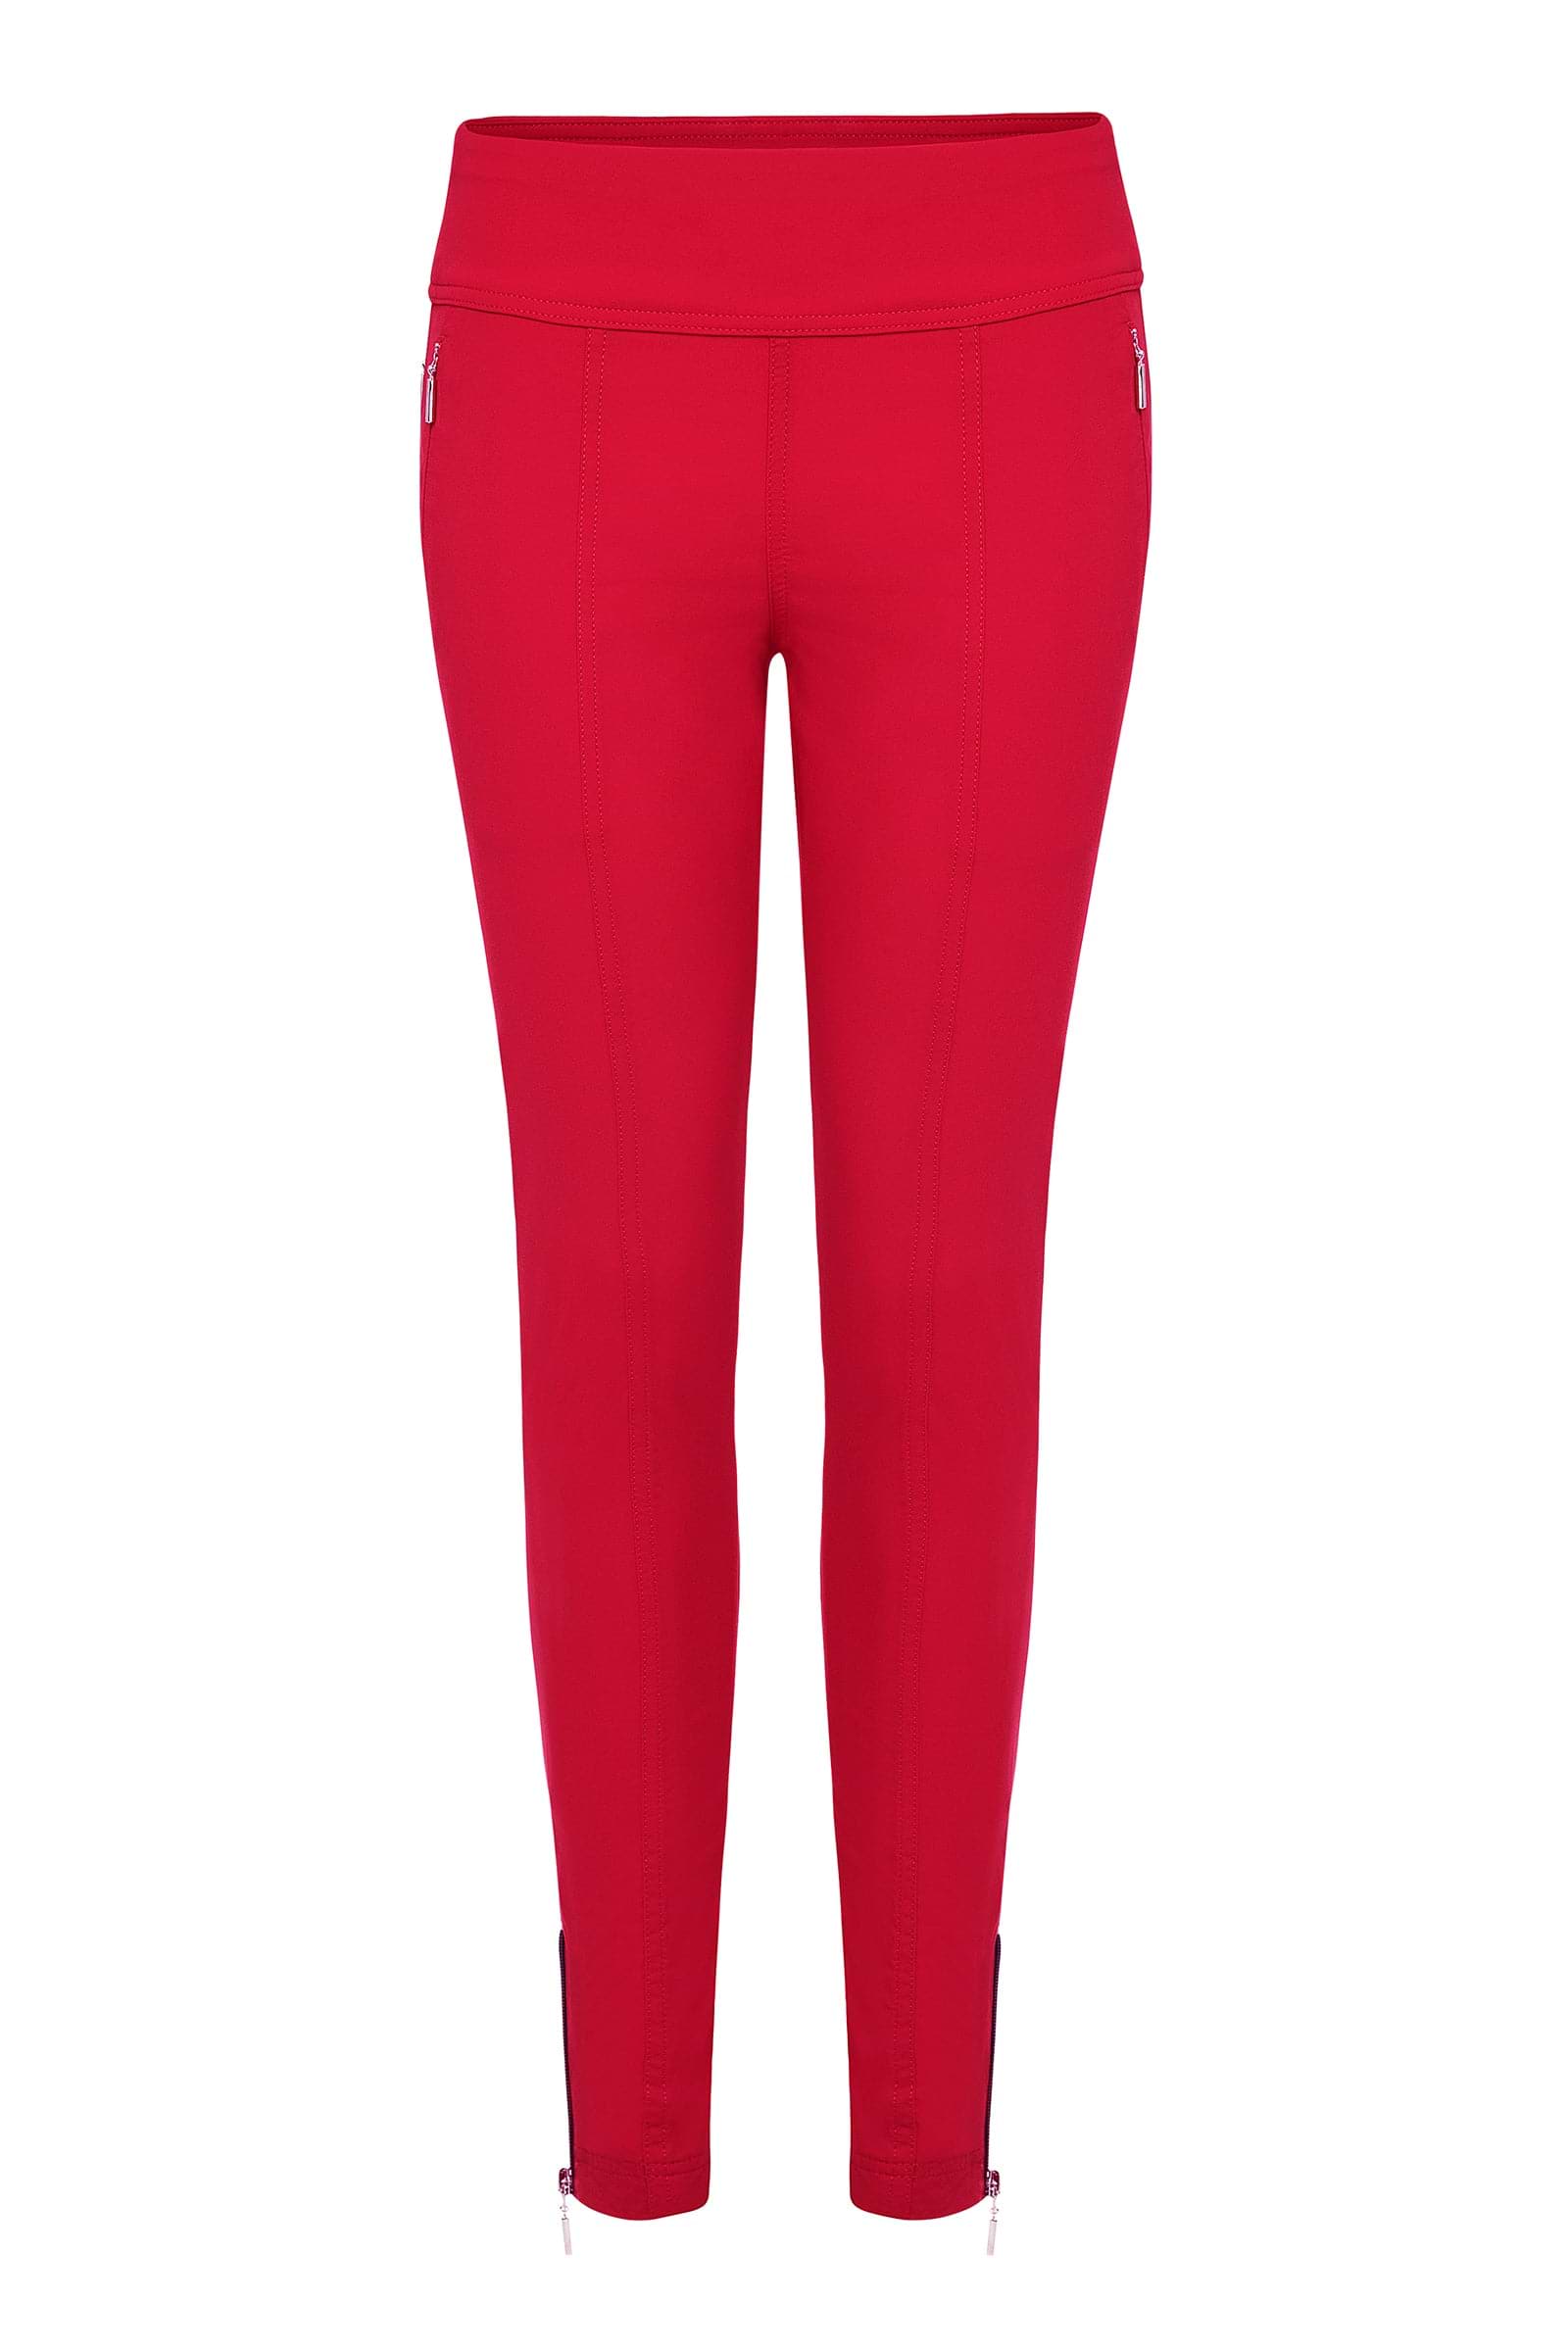 The Best Travel Pants. Flat Lay of the Allie Hybrid Pant in Atomic Red